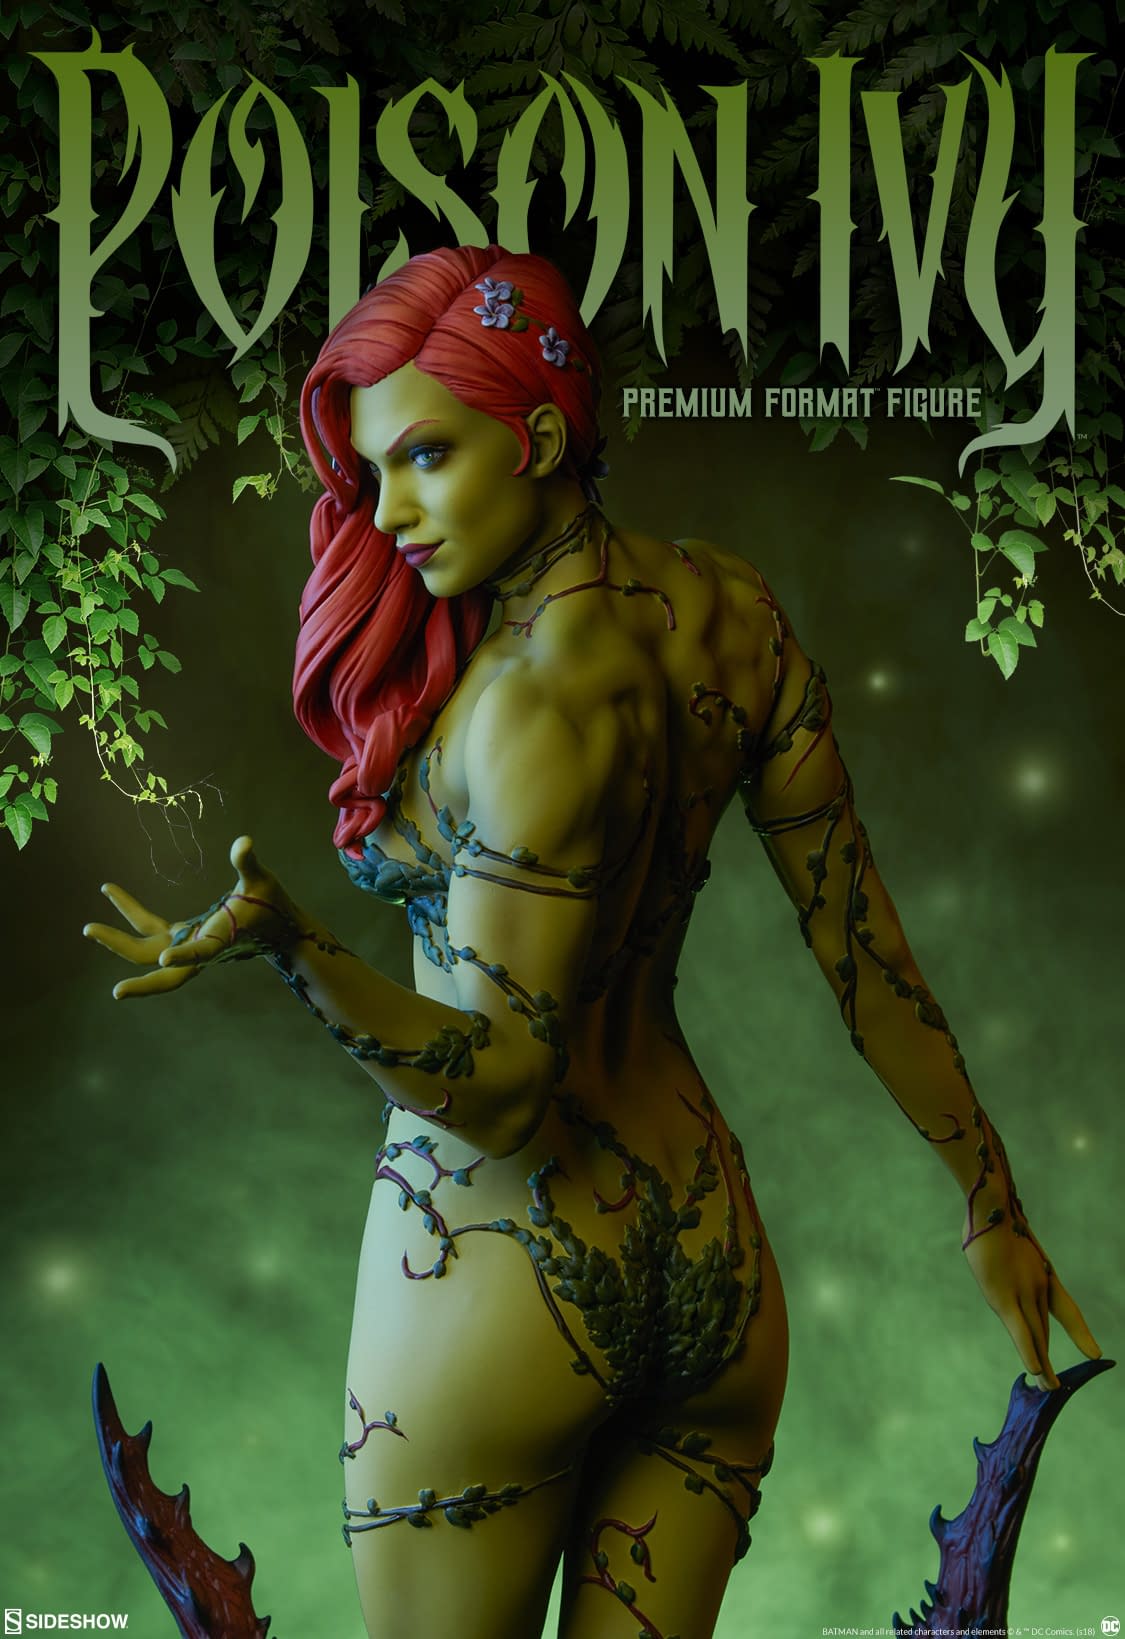 Poison Ivy Premium Format Figure From Sideshow Collectibles Reveal Image